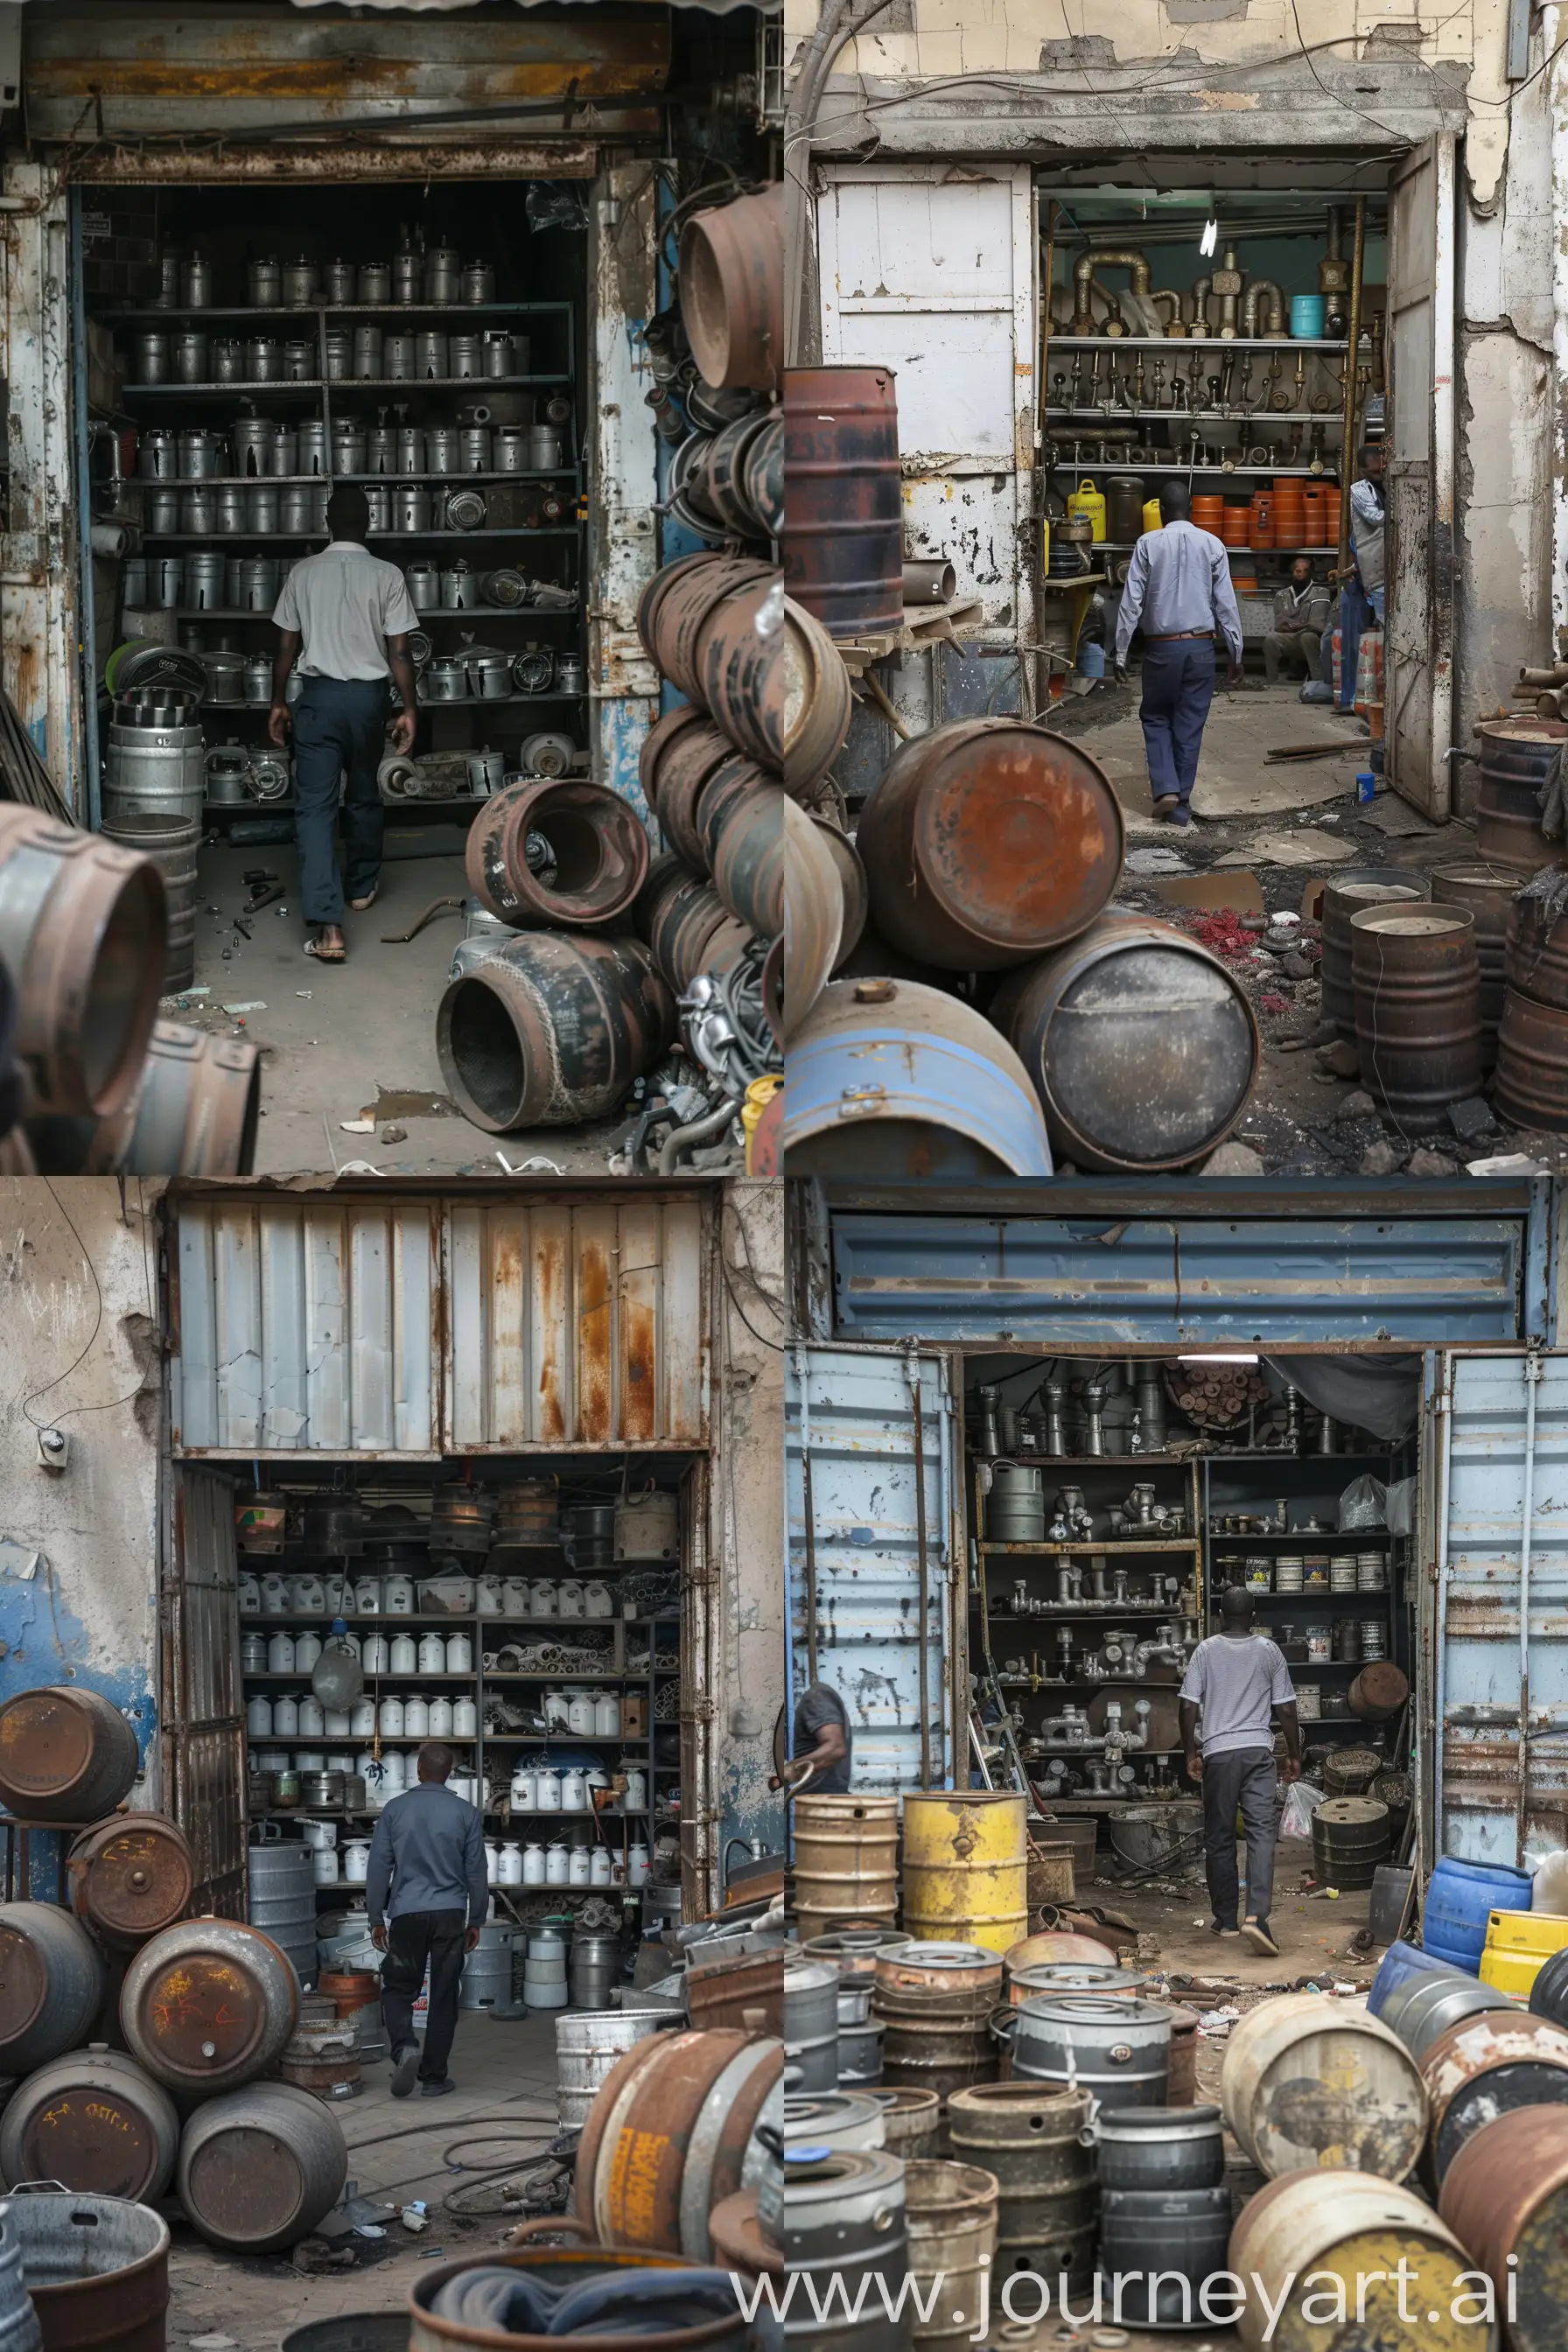 A man is walking through the market to a big door. Inside is a bright store with shelves where new plumbing is neatly arranged. Around him at the market, sellers are selling old rusty plumbing, leaking barrels., --ar 4:6 --v 6